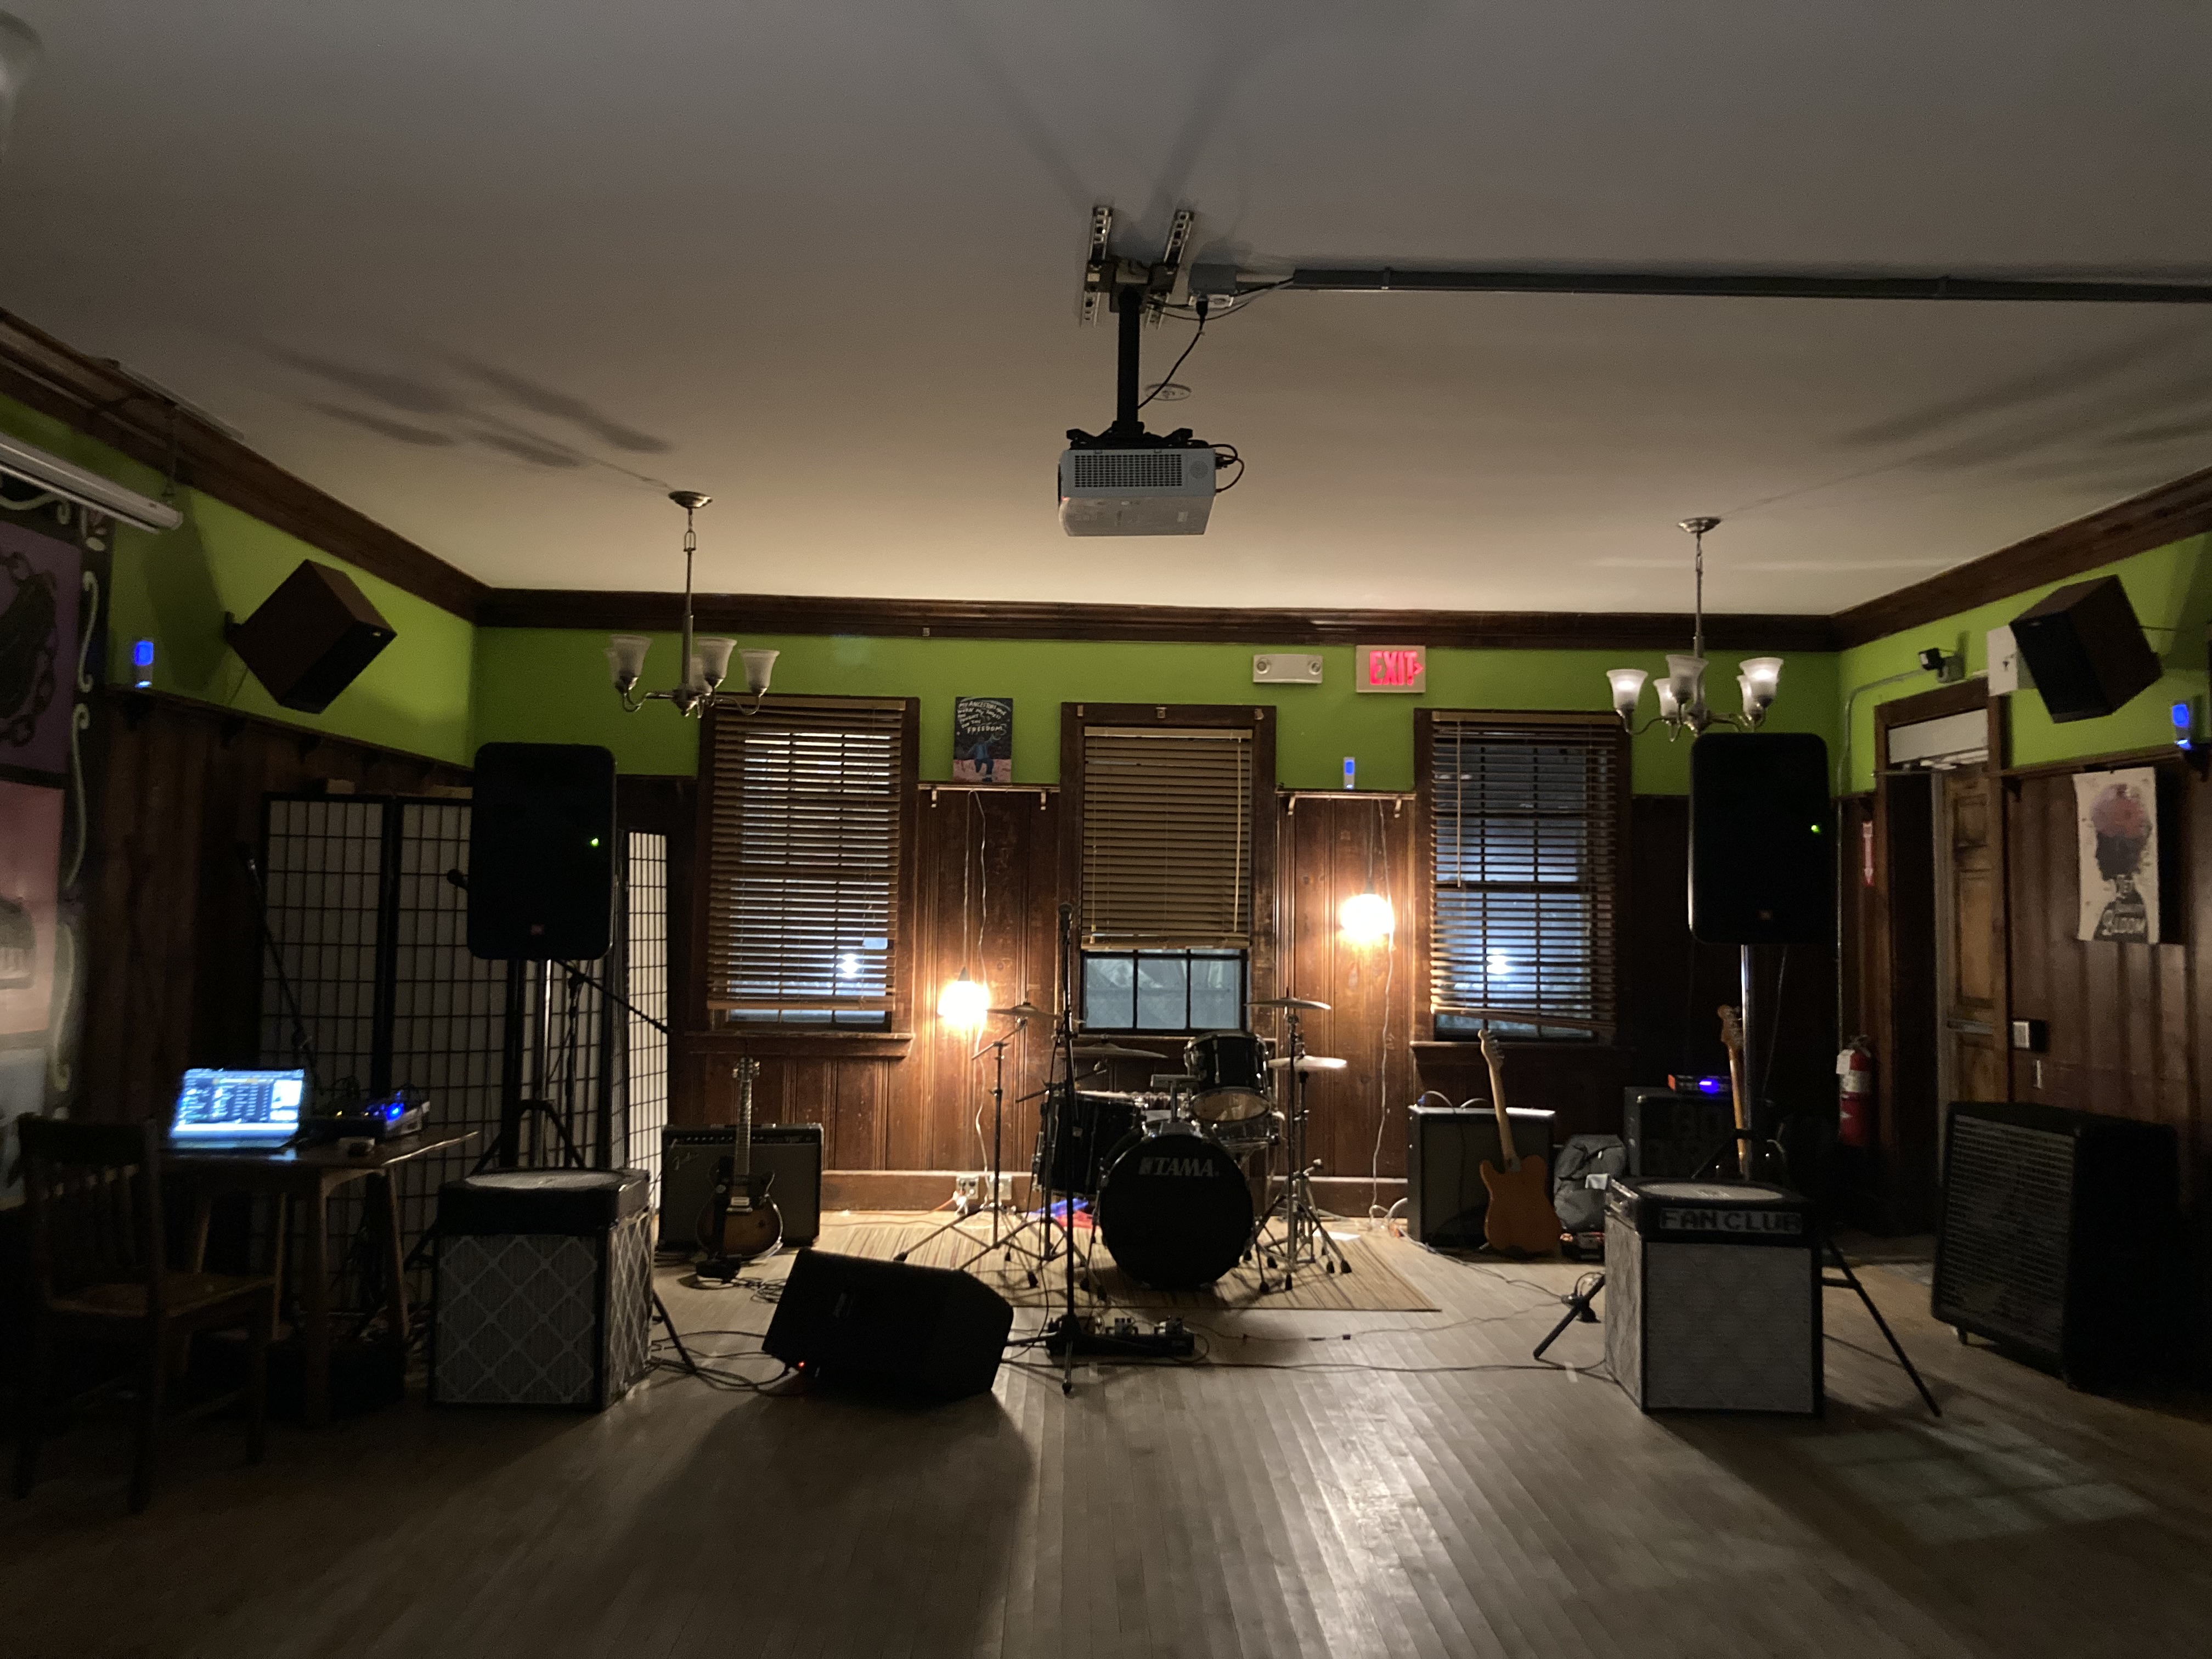 photo of a room with music equipment set up for a show including a drum kit, amps, and mic stands. there are 2 corsi-rosenthal boxes on the floor. there are also 3 small flashlight-looking items on the left, back, and right wall ledges pointed toward the viewer.